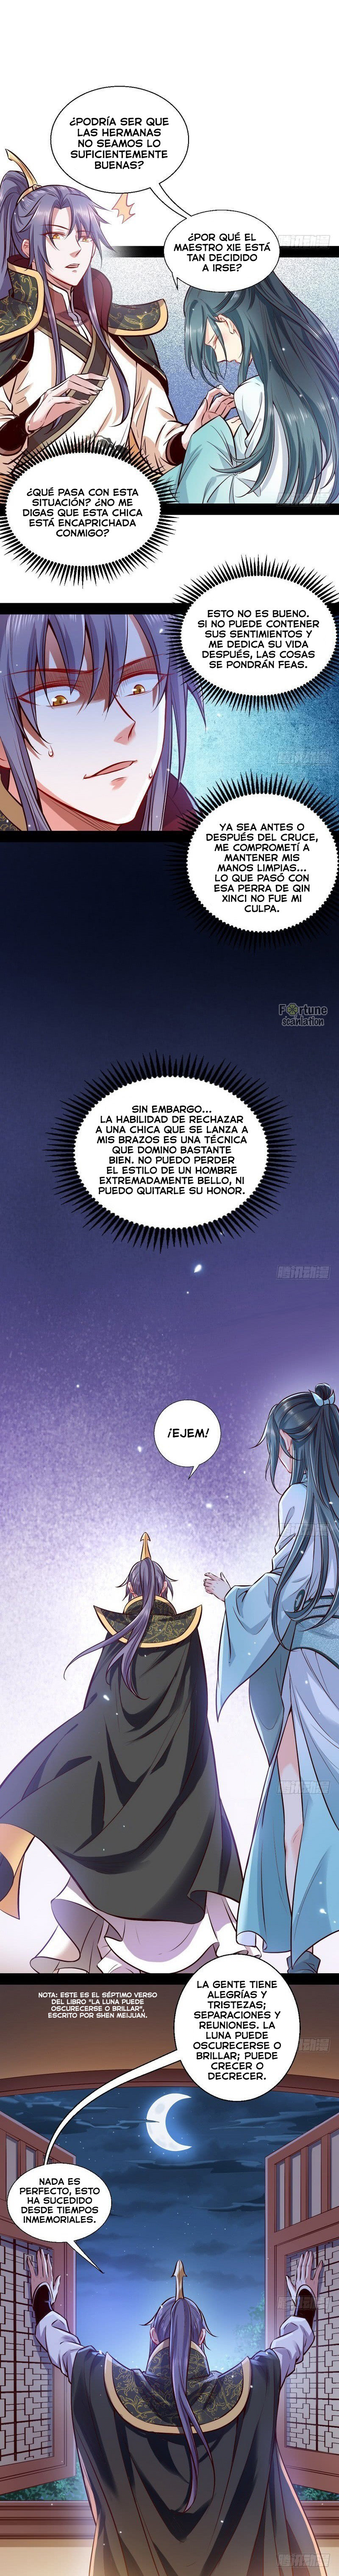 Manga Soy un dios maligno Chapter 29 image number 18